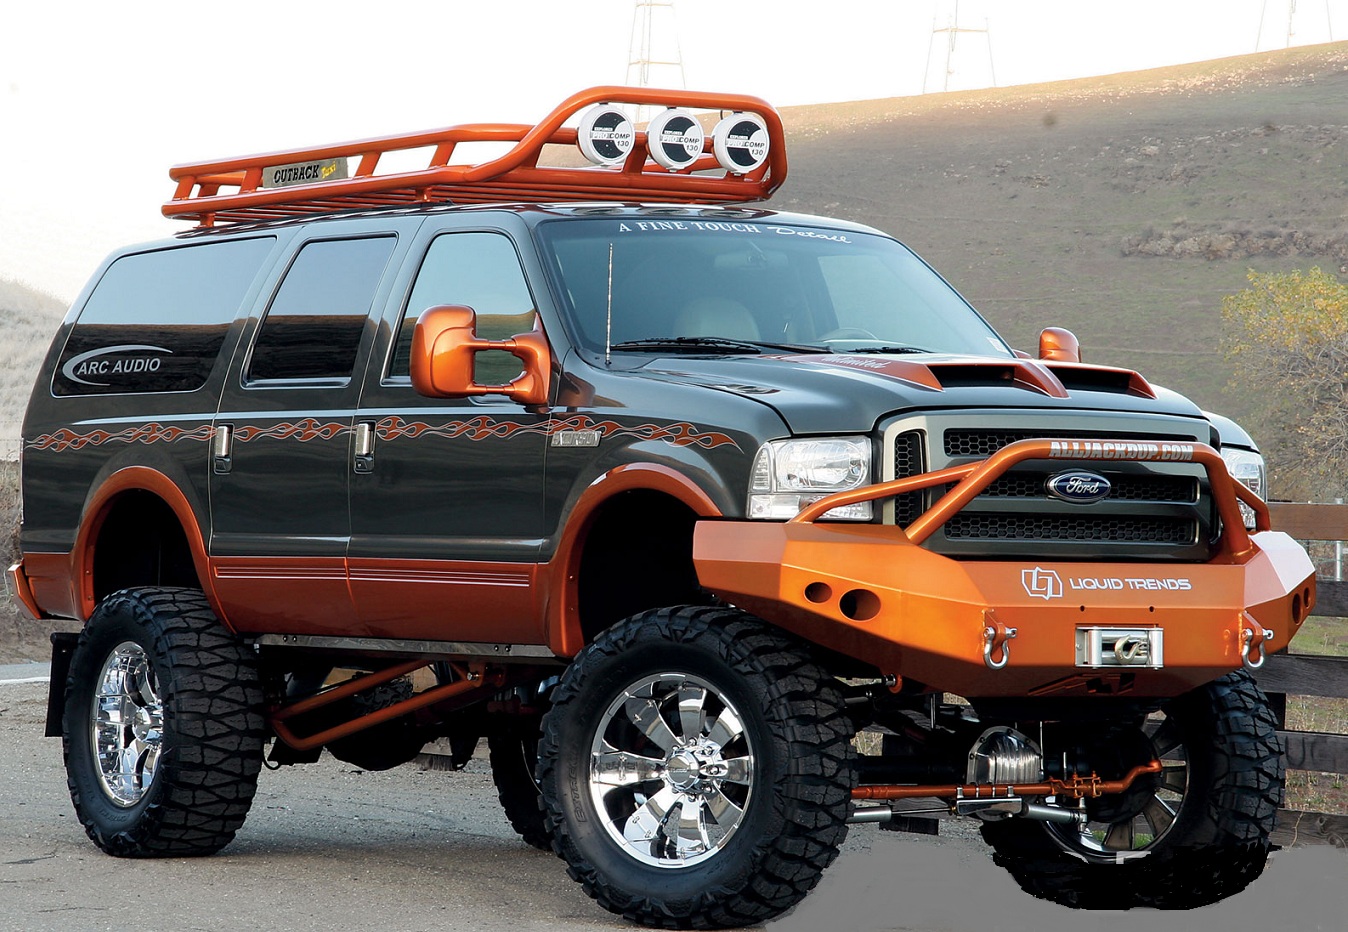 Custom lifted ford excursions #4